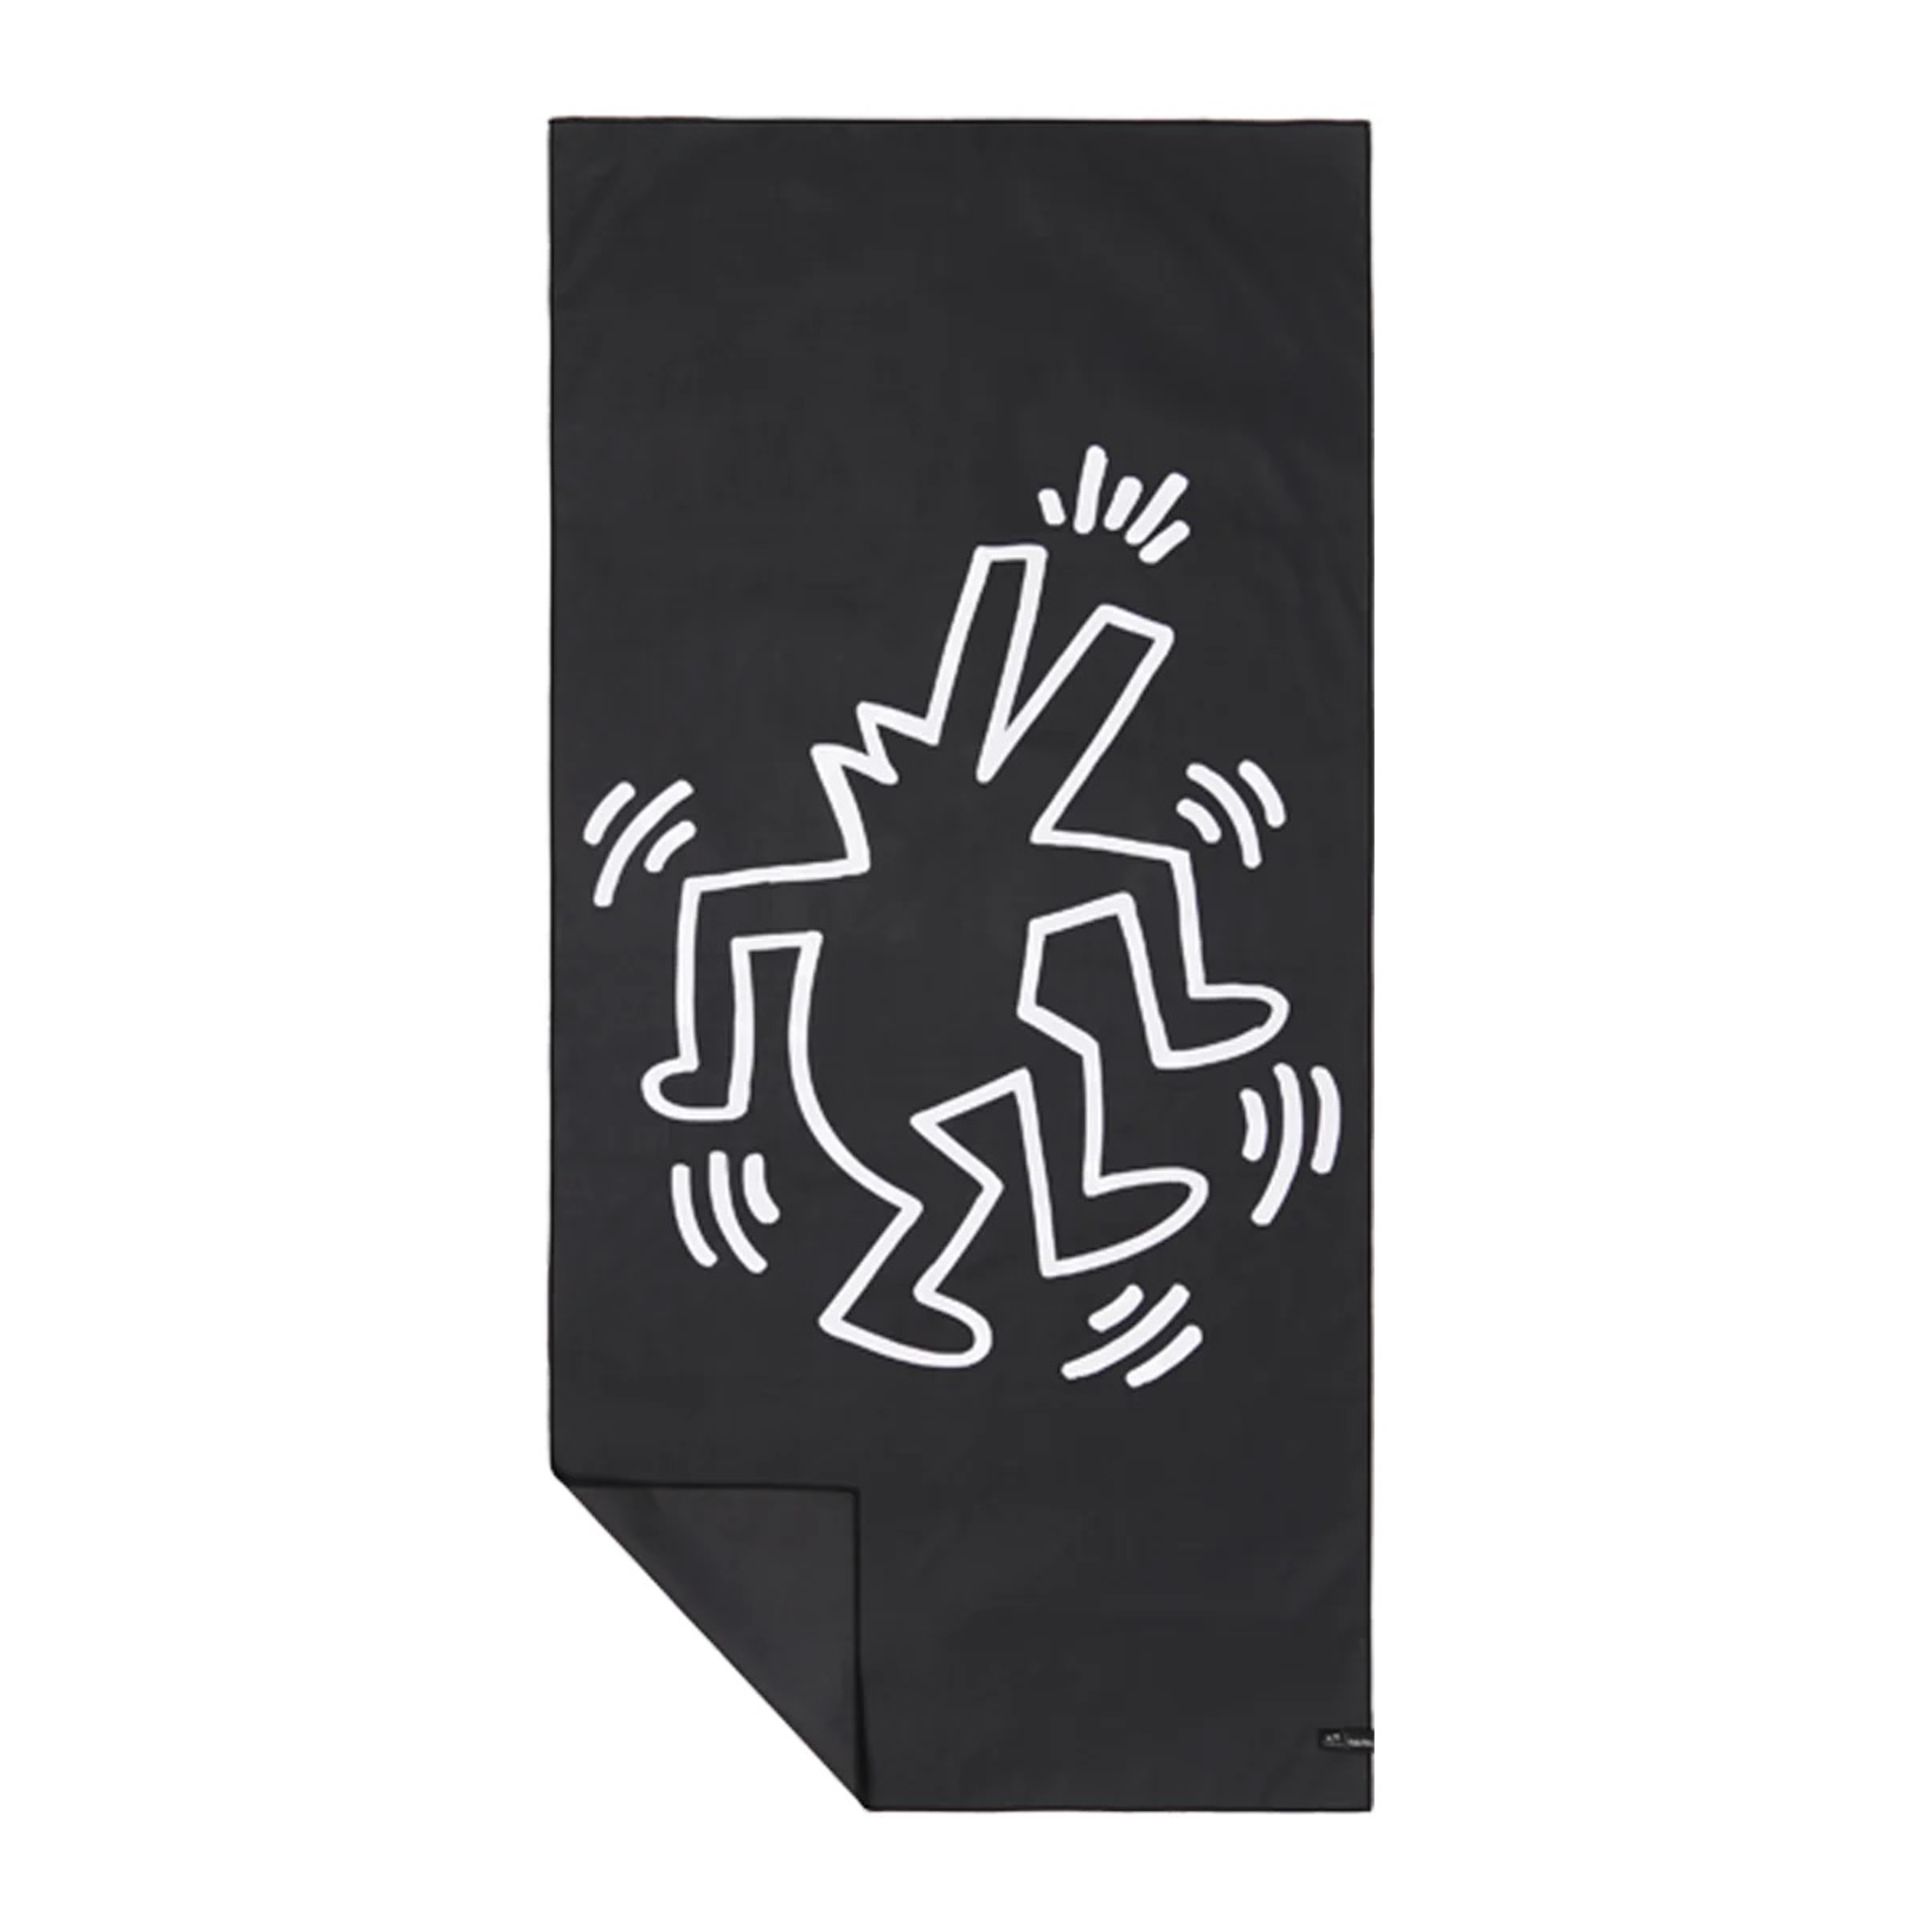 Keith Haring "Untitled" Towel